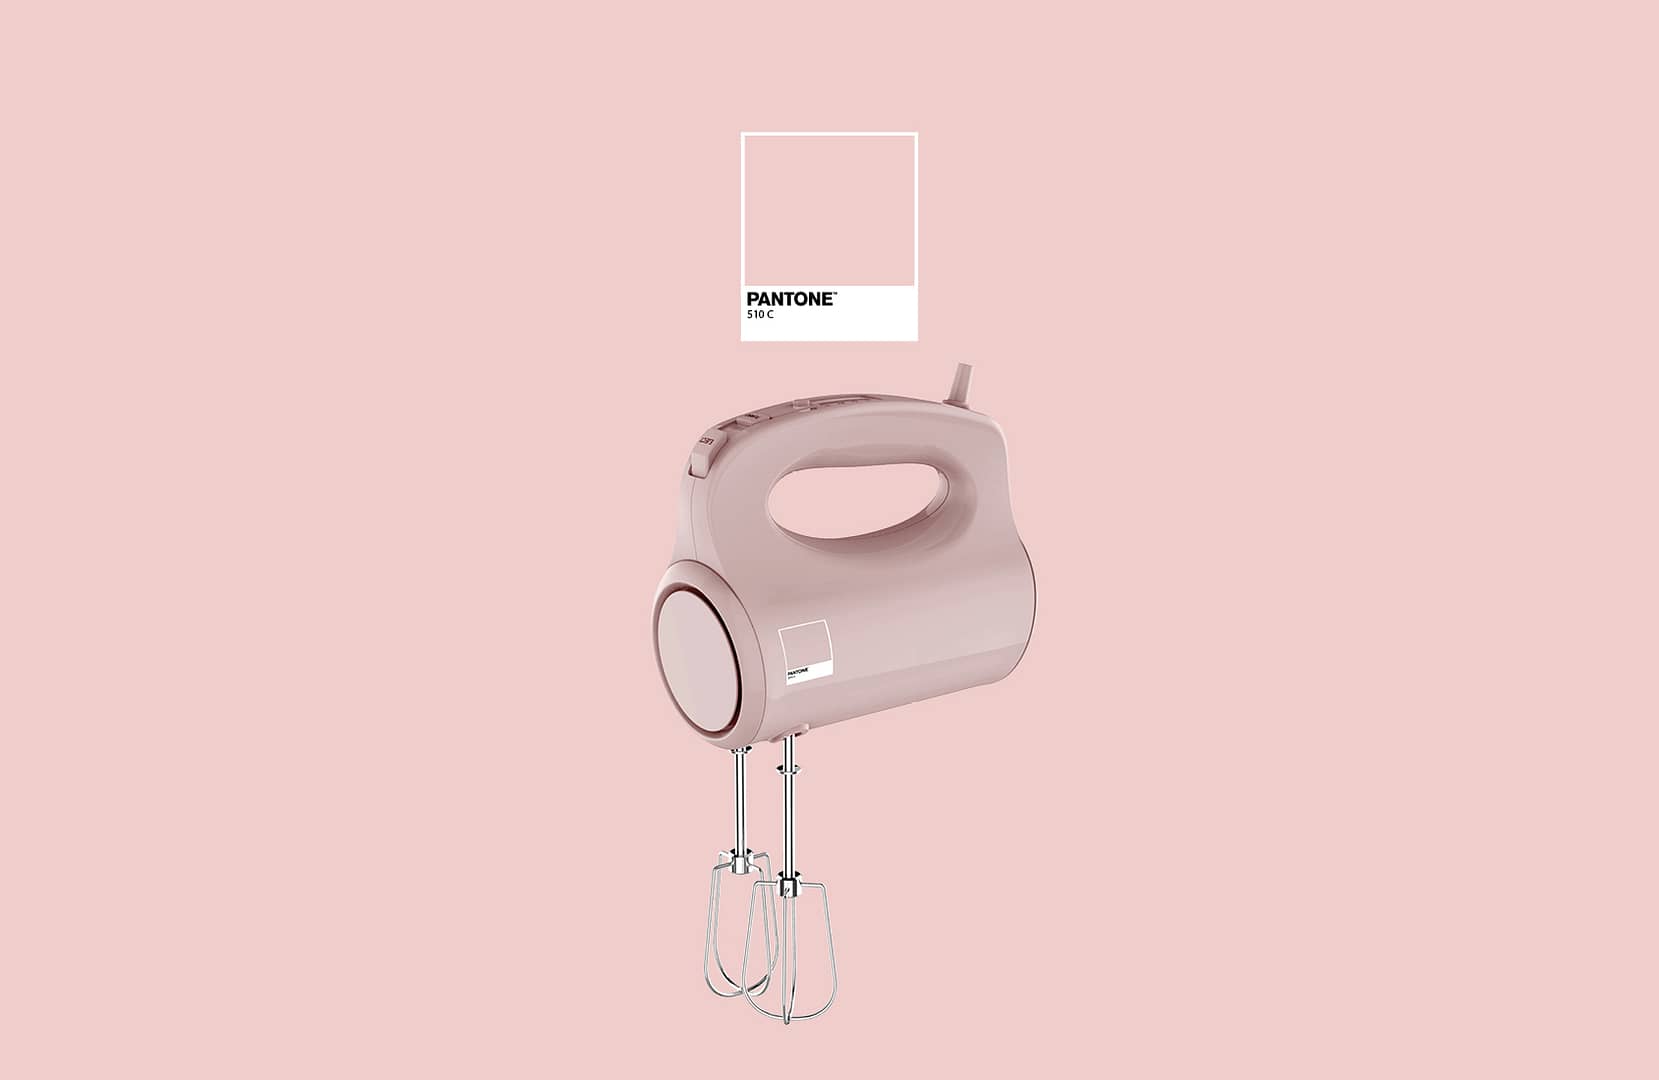 CMF design for the application of new color distributions - pale pink - to small appliances designed by Bimar & Pantone